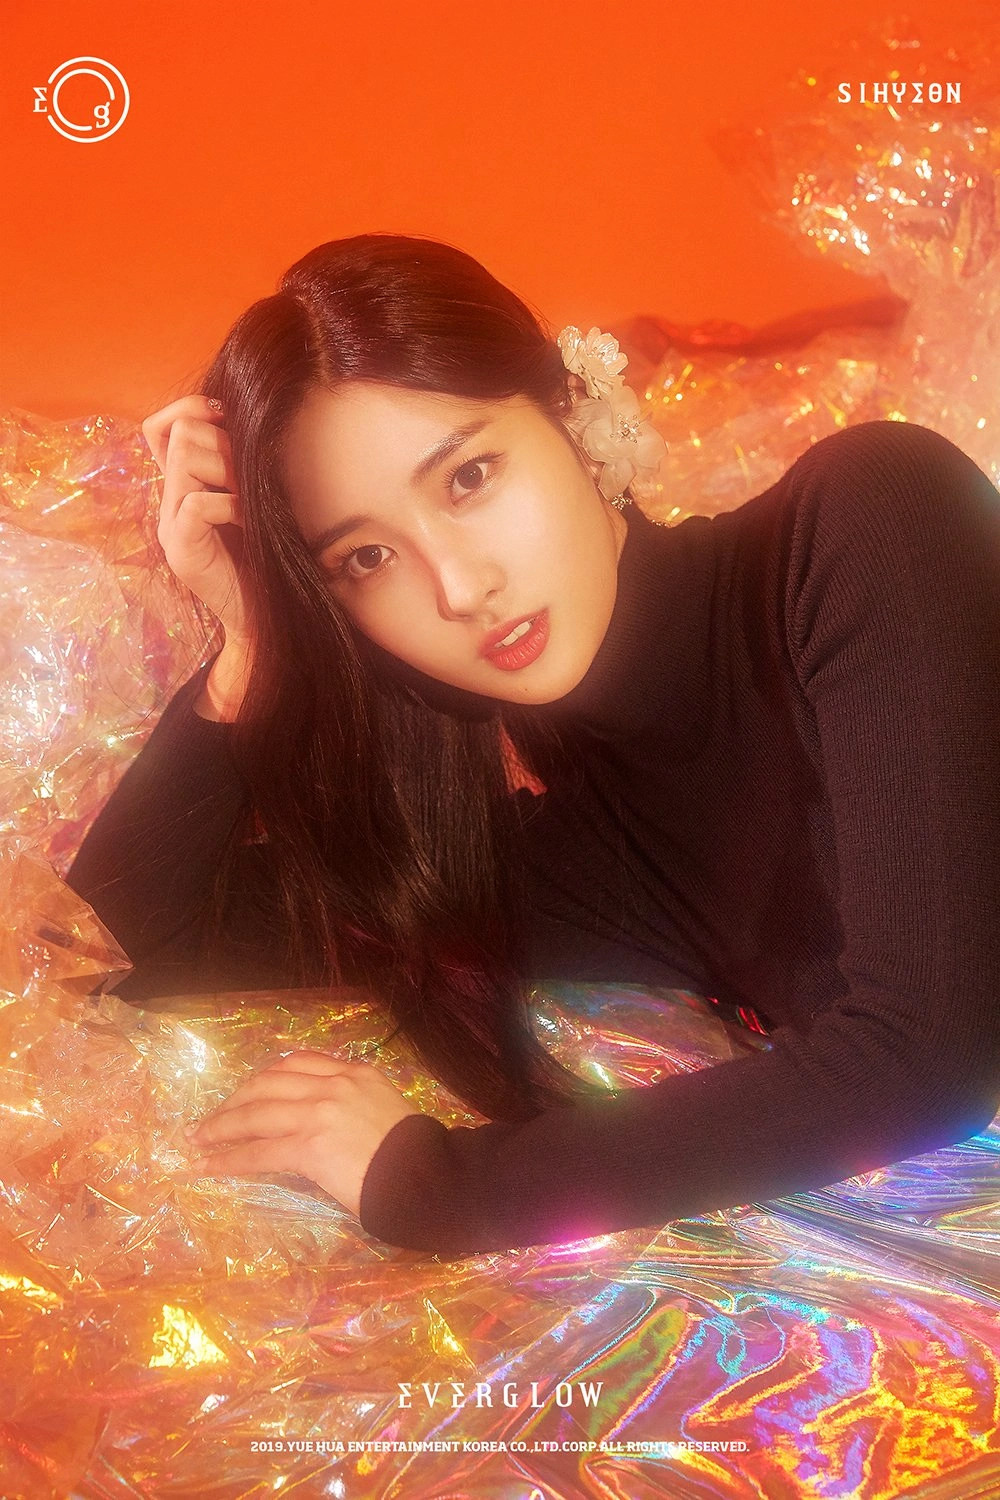 Everglow Arrival of Everglow Sihyeon Concept Teaser Picture Image Photo Kpop K-Concept 1